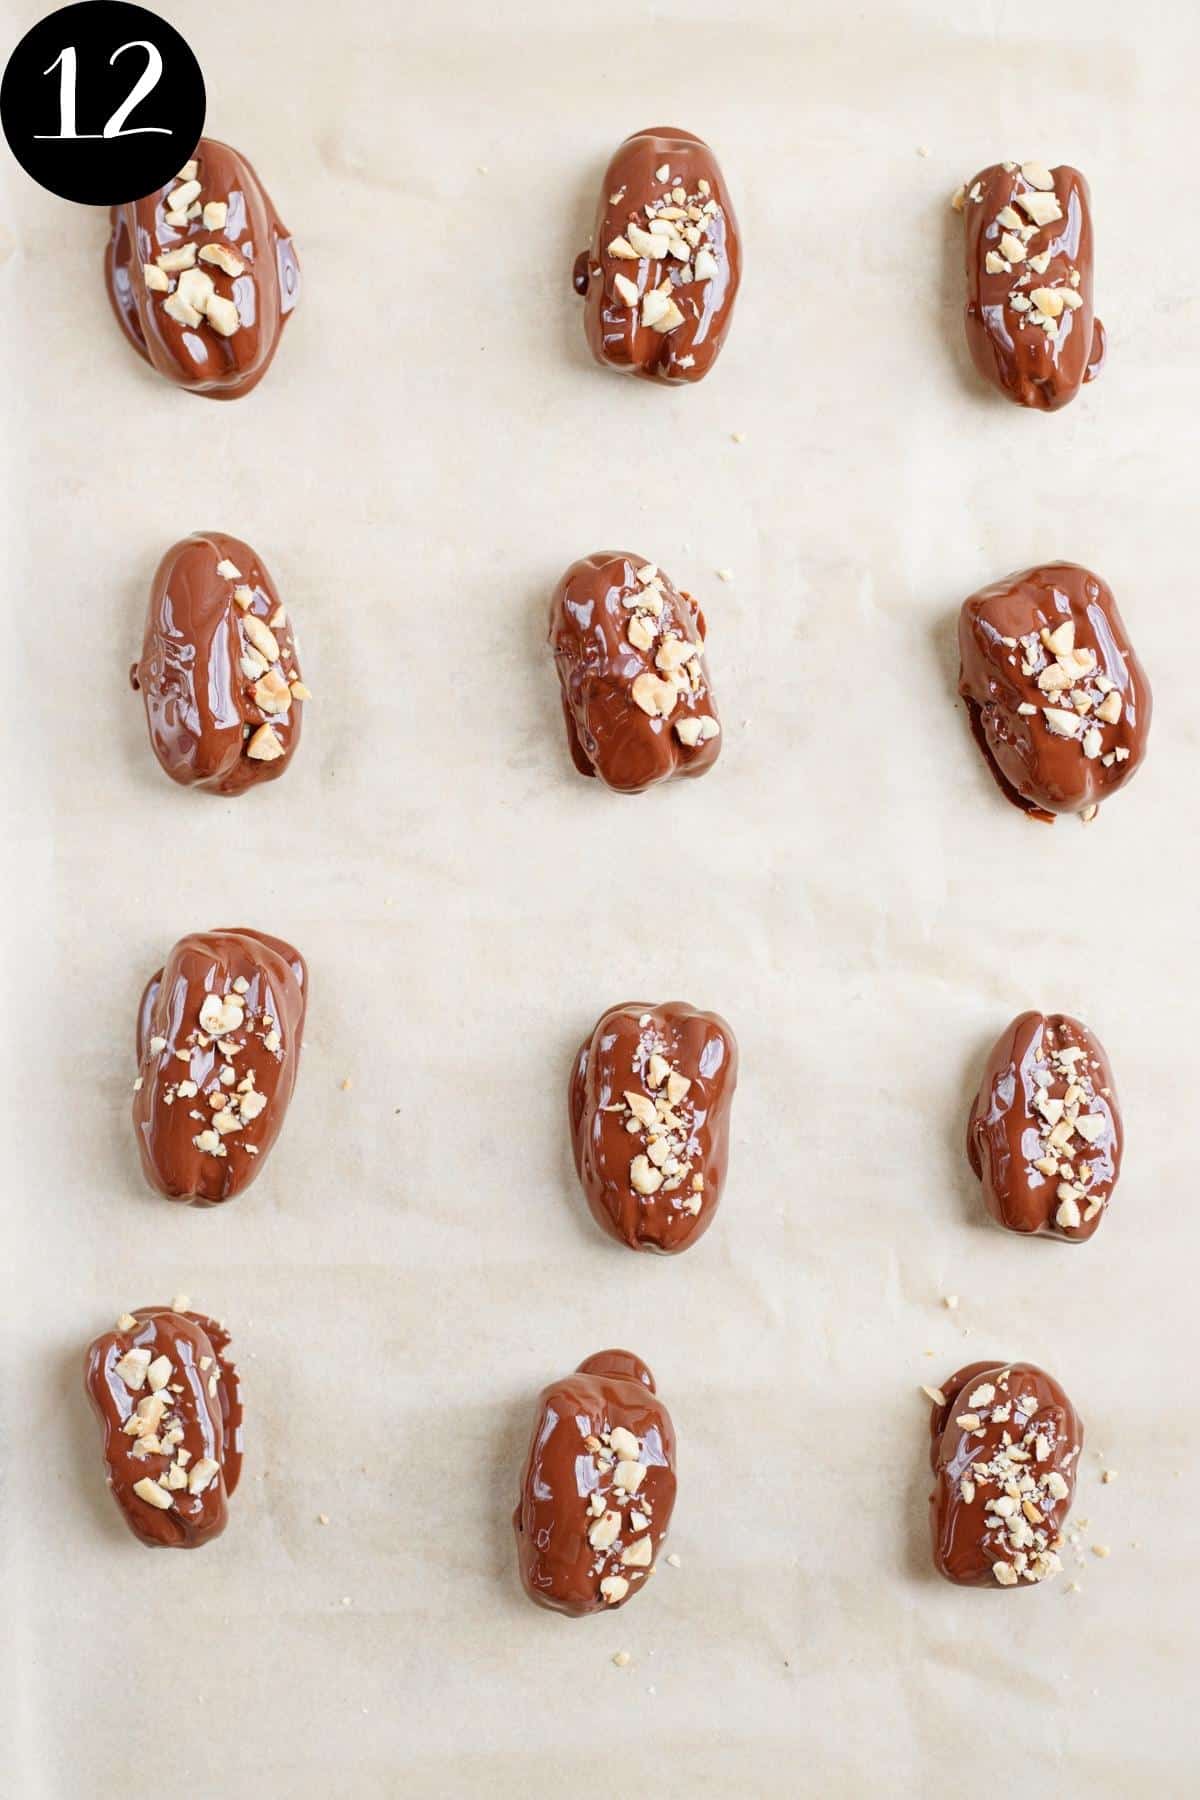 Snicker dates on brown parchment paper before freezing.